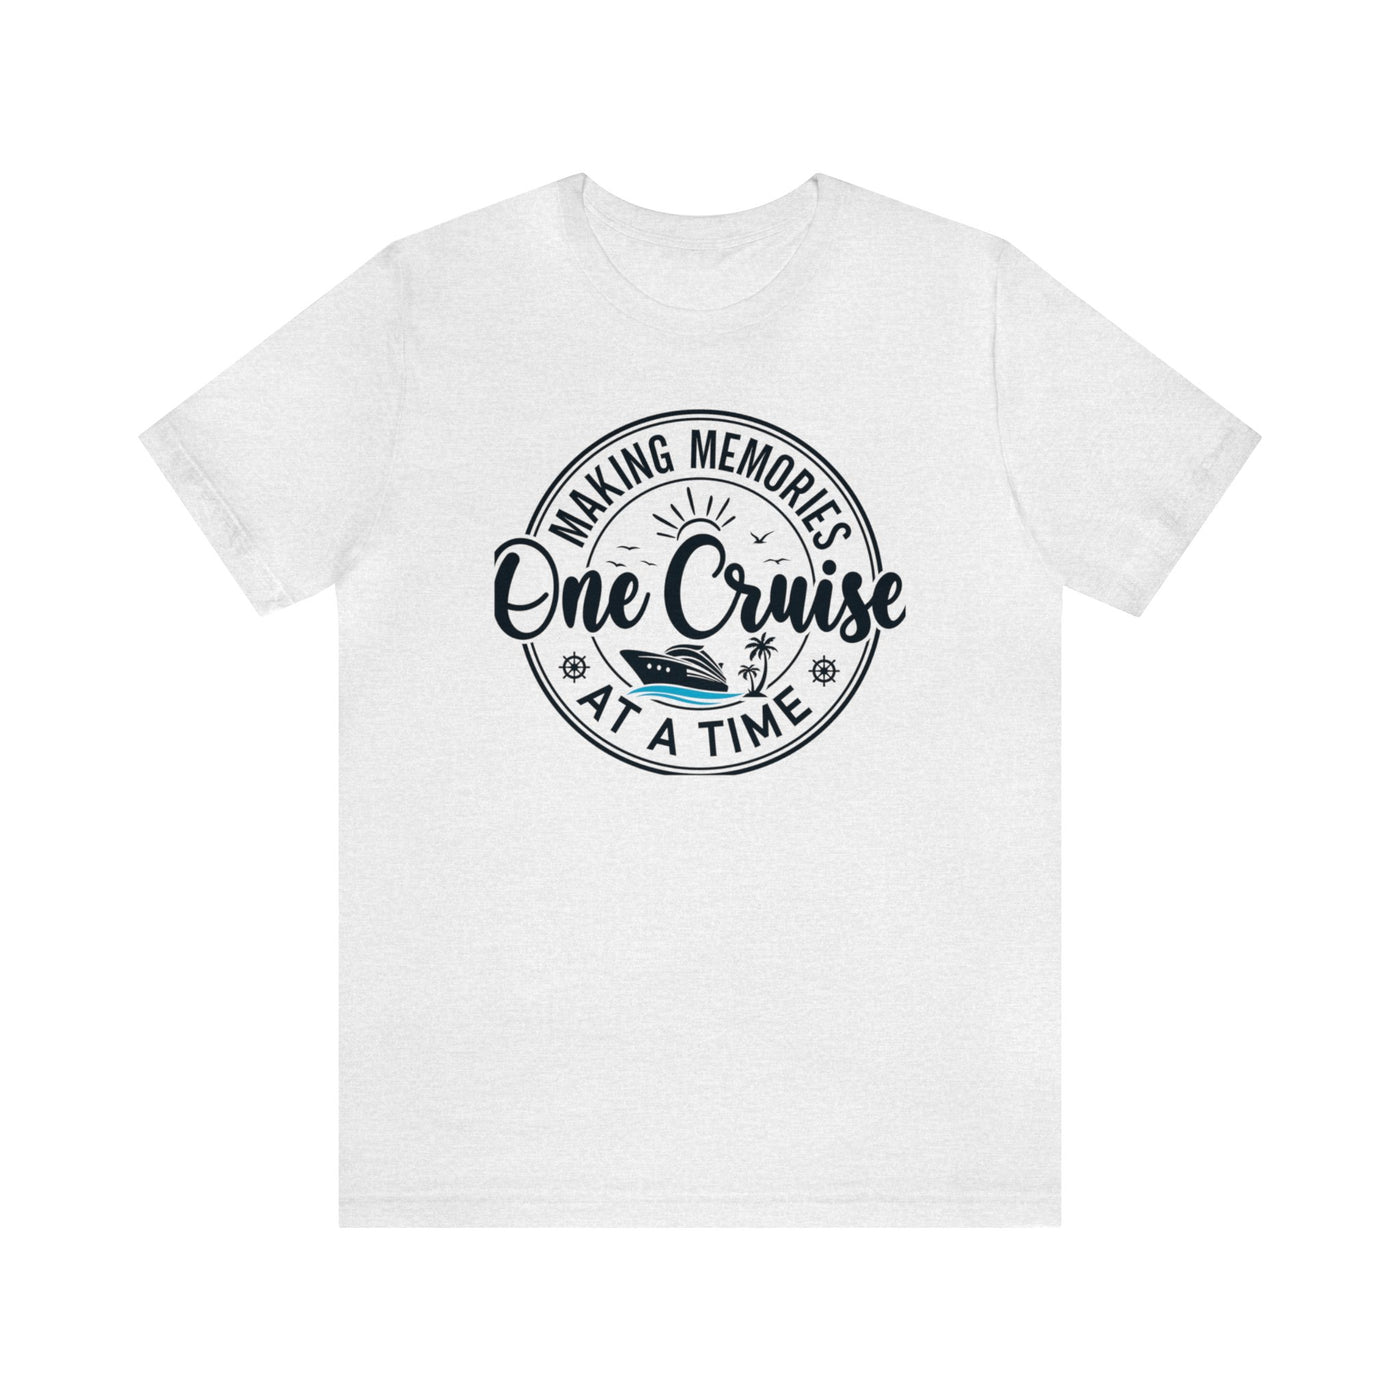 Making memories one cruise at a time Short Sleeve Tee